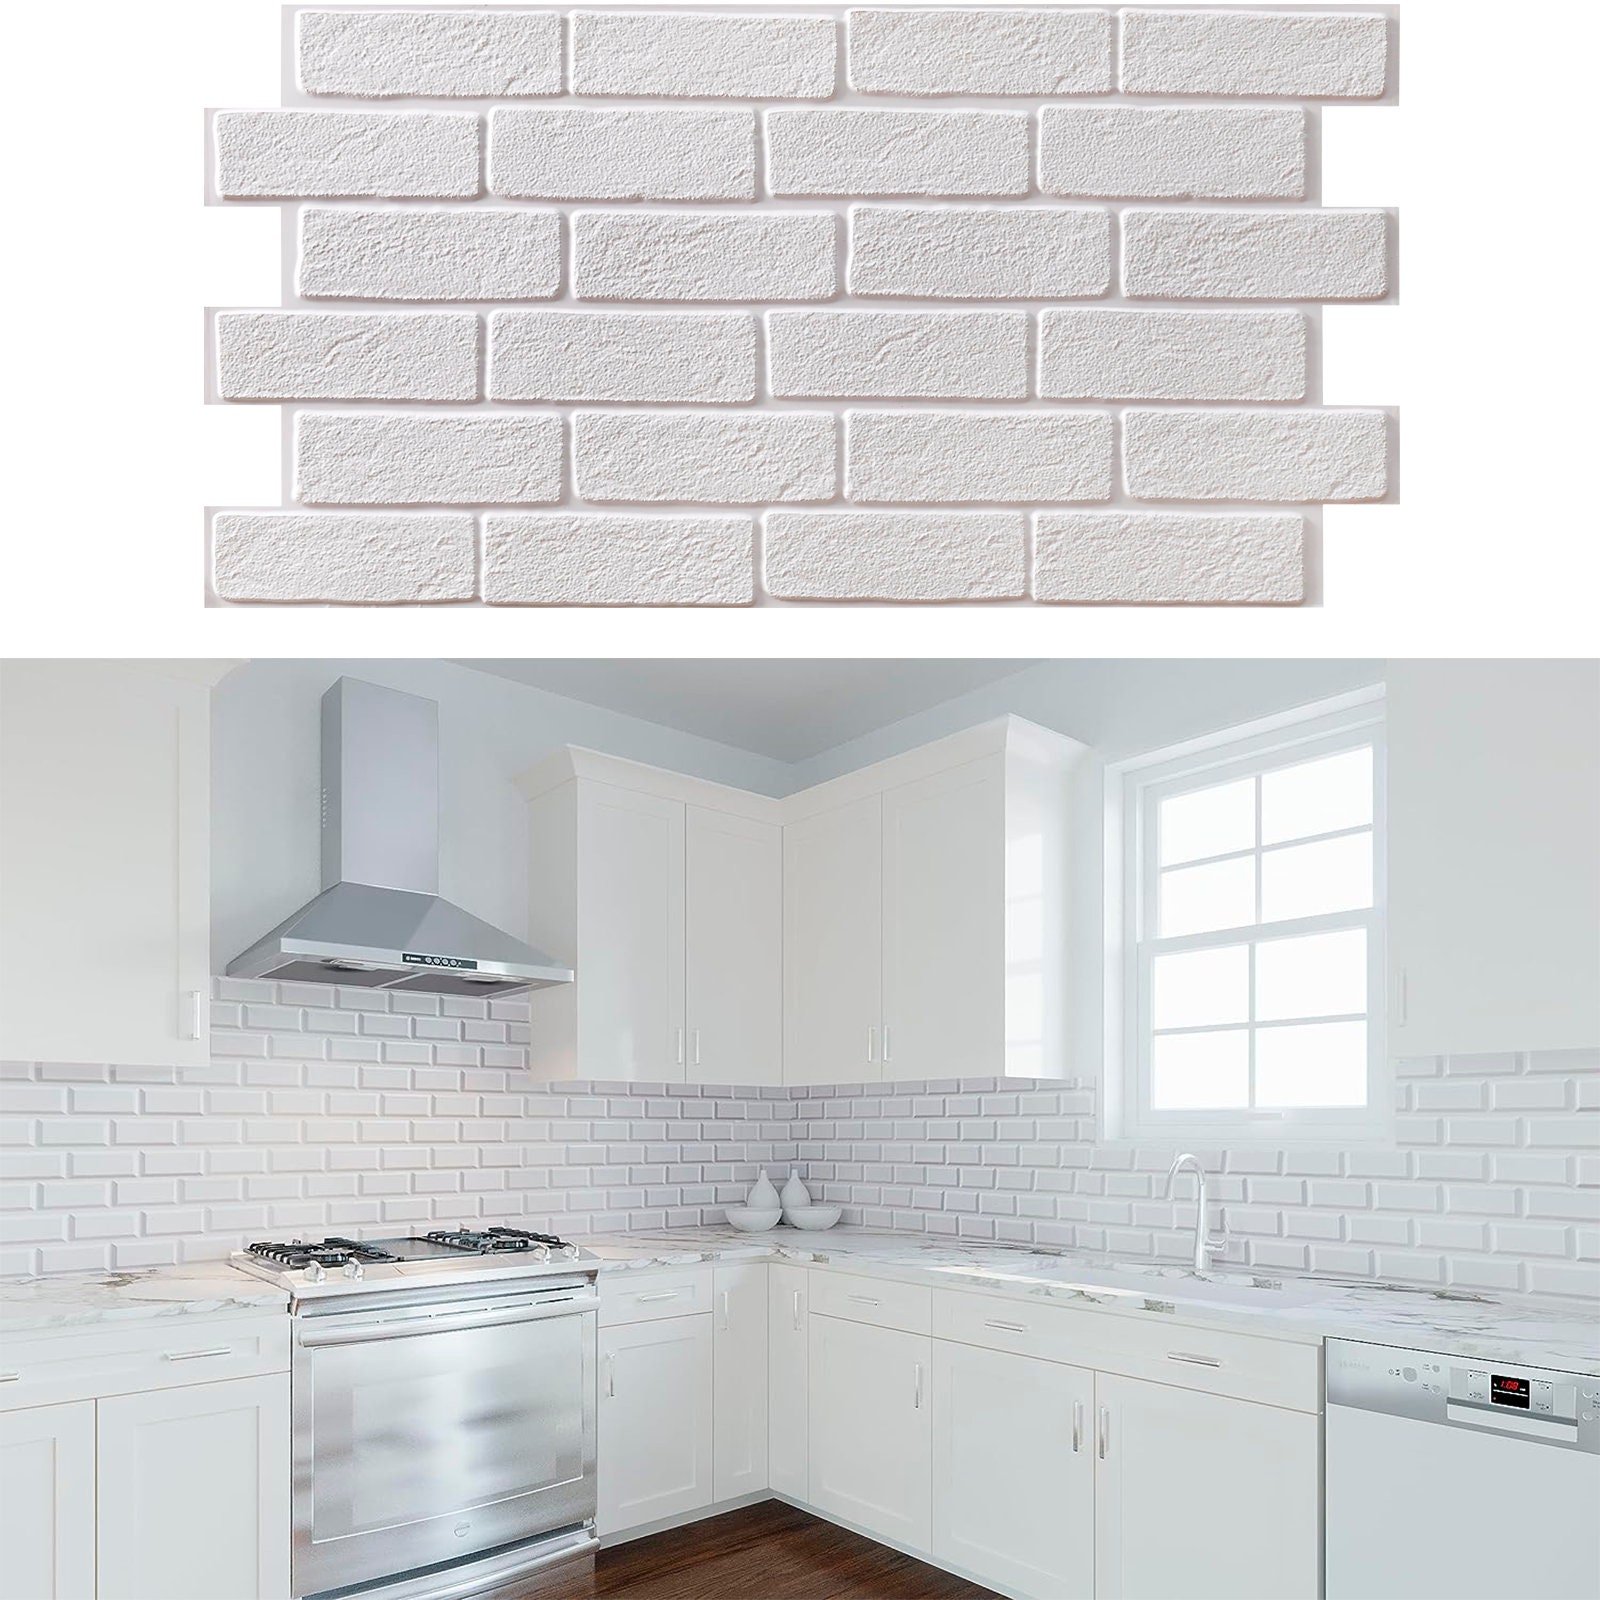 Art3d® Decorative 3D Panels 19.7x19in Textured Wall Design Board, White, 12  Tiles 32 Sq Ft 